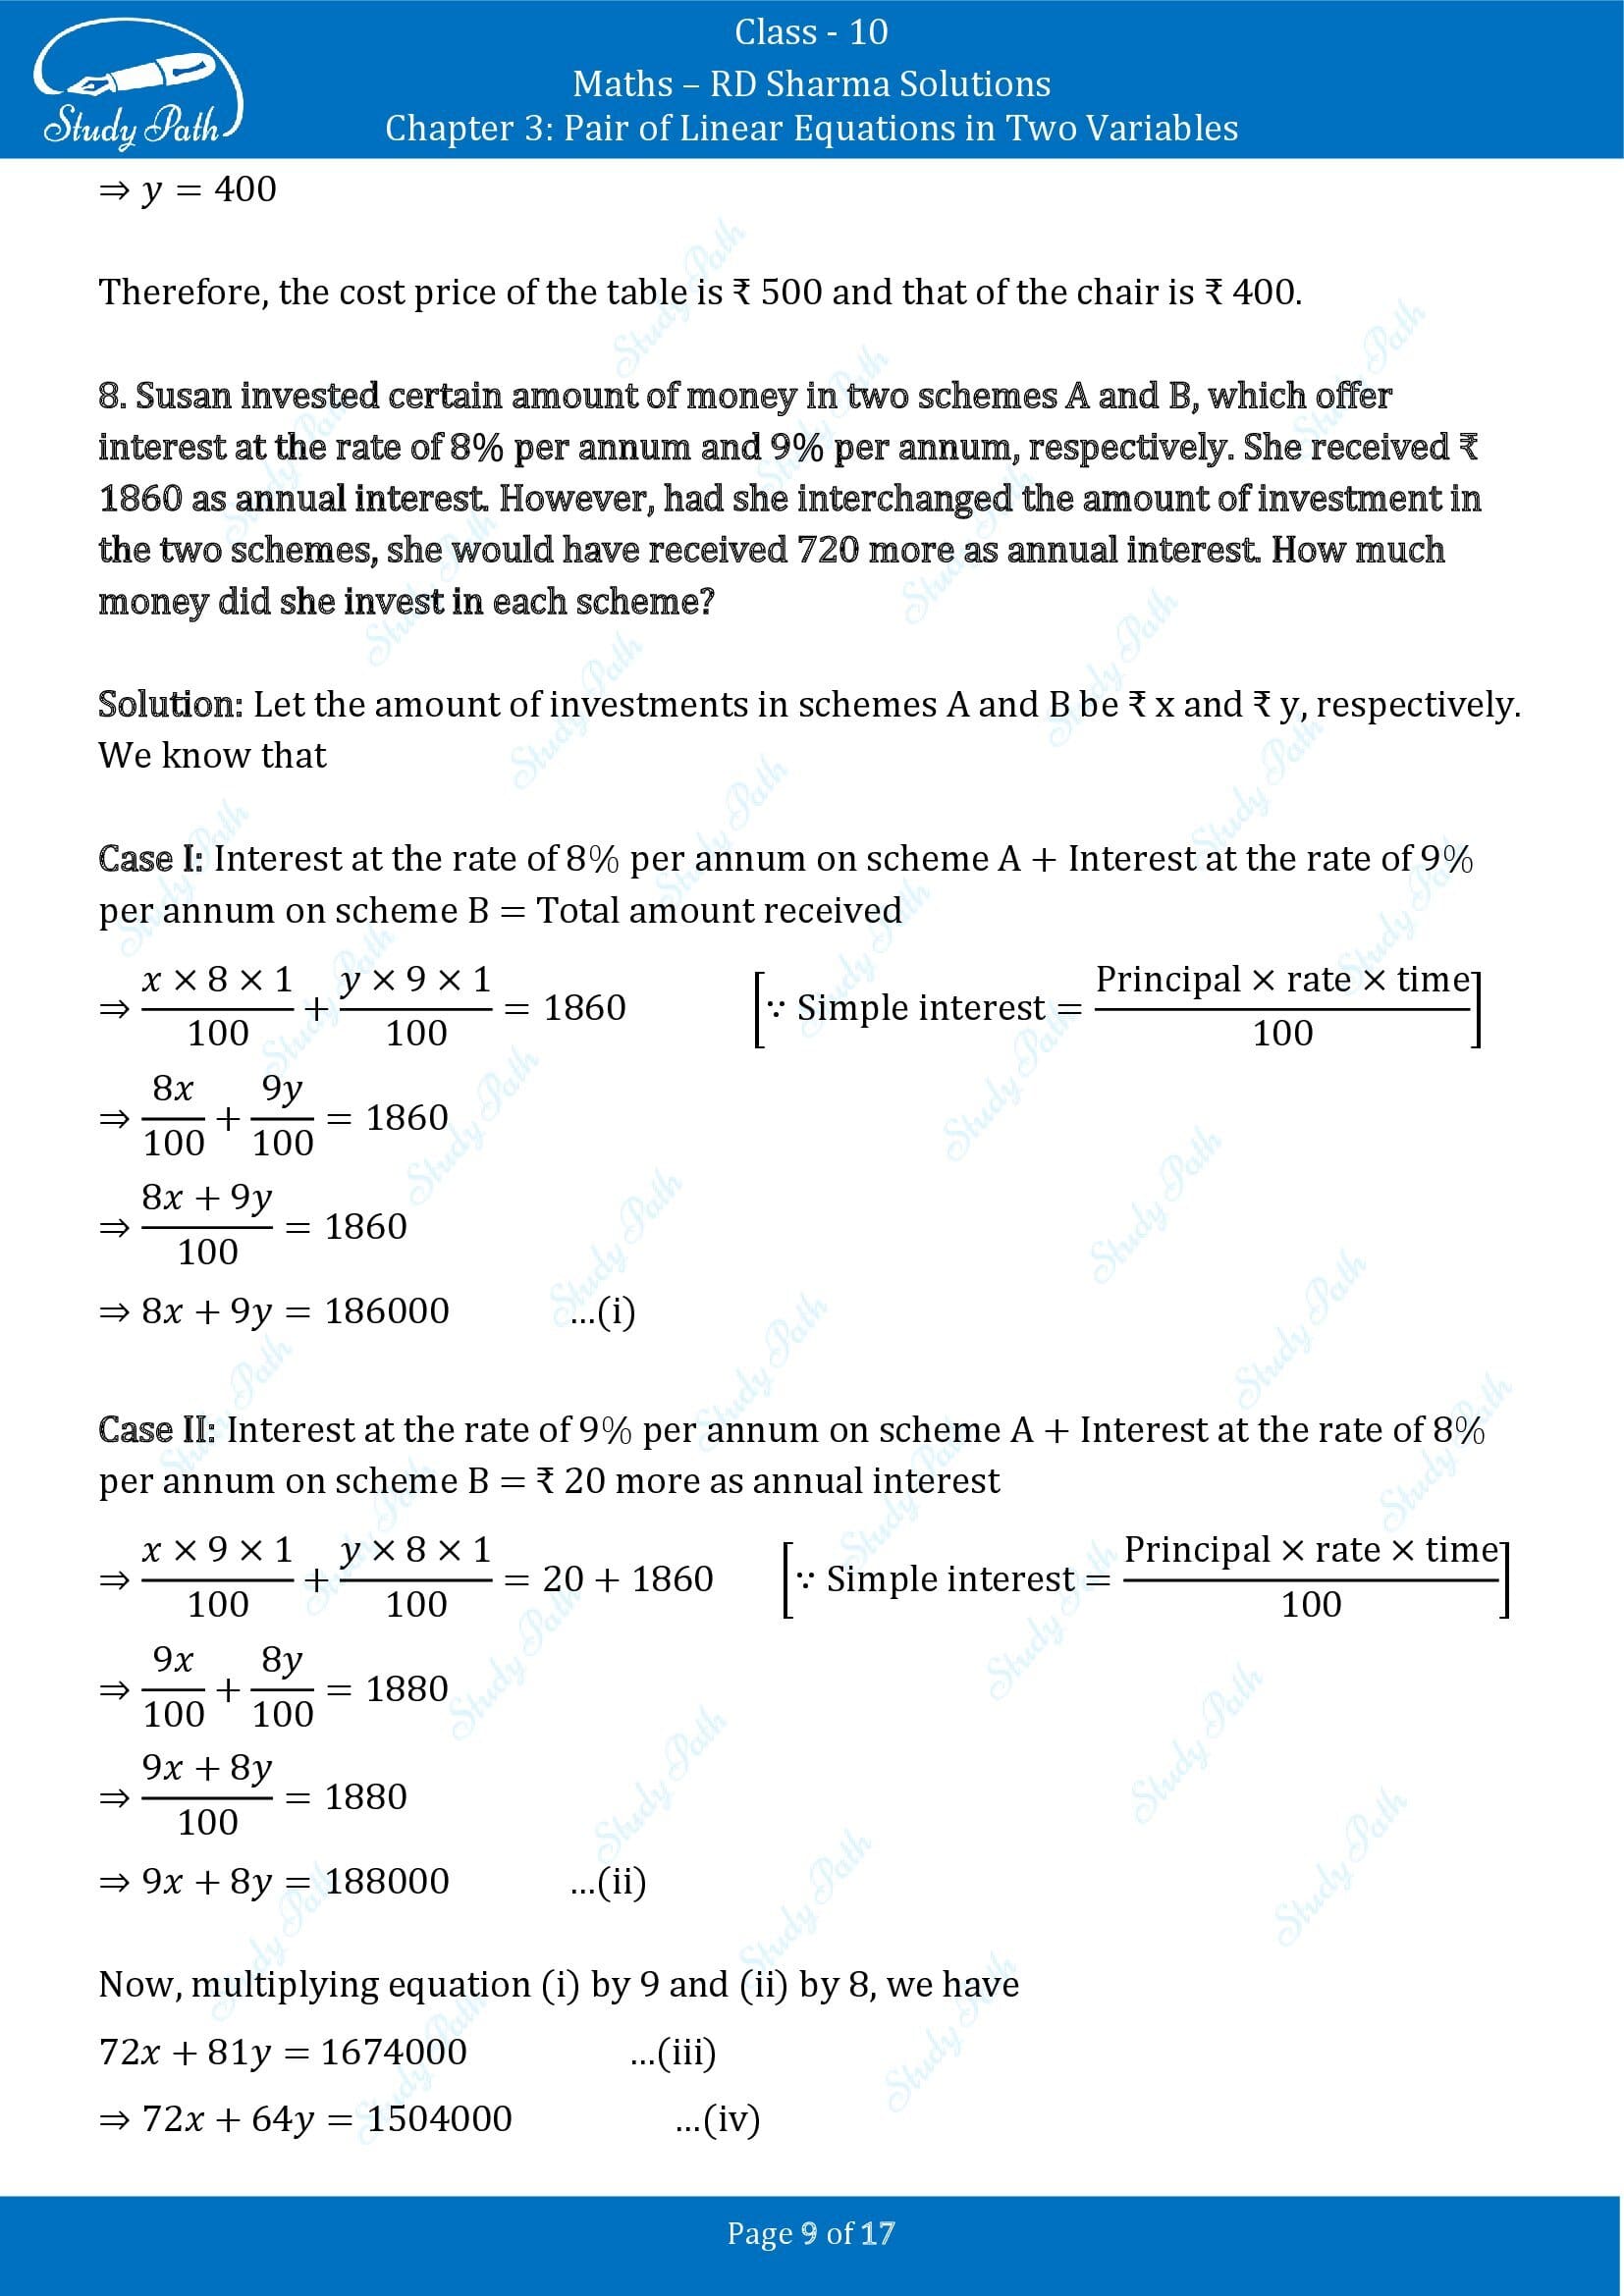 RD Sharma Solutions Class 10 Chapter 3 Pair of Linear Equations in Two Variables Exercise 3.6 00009